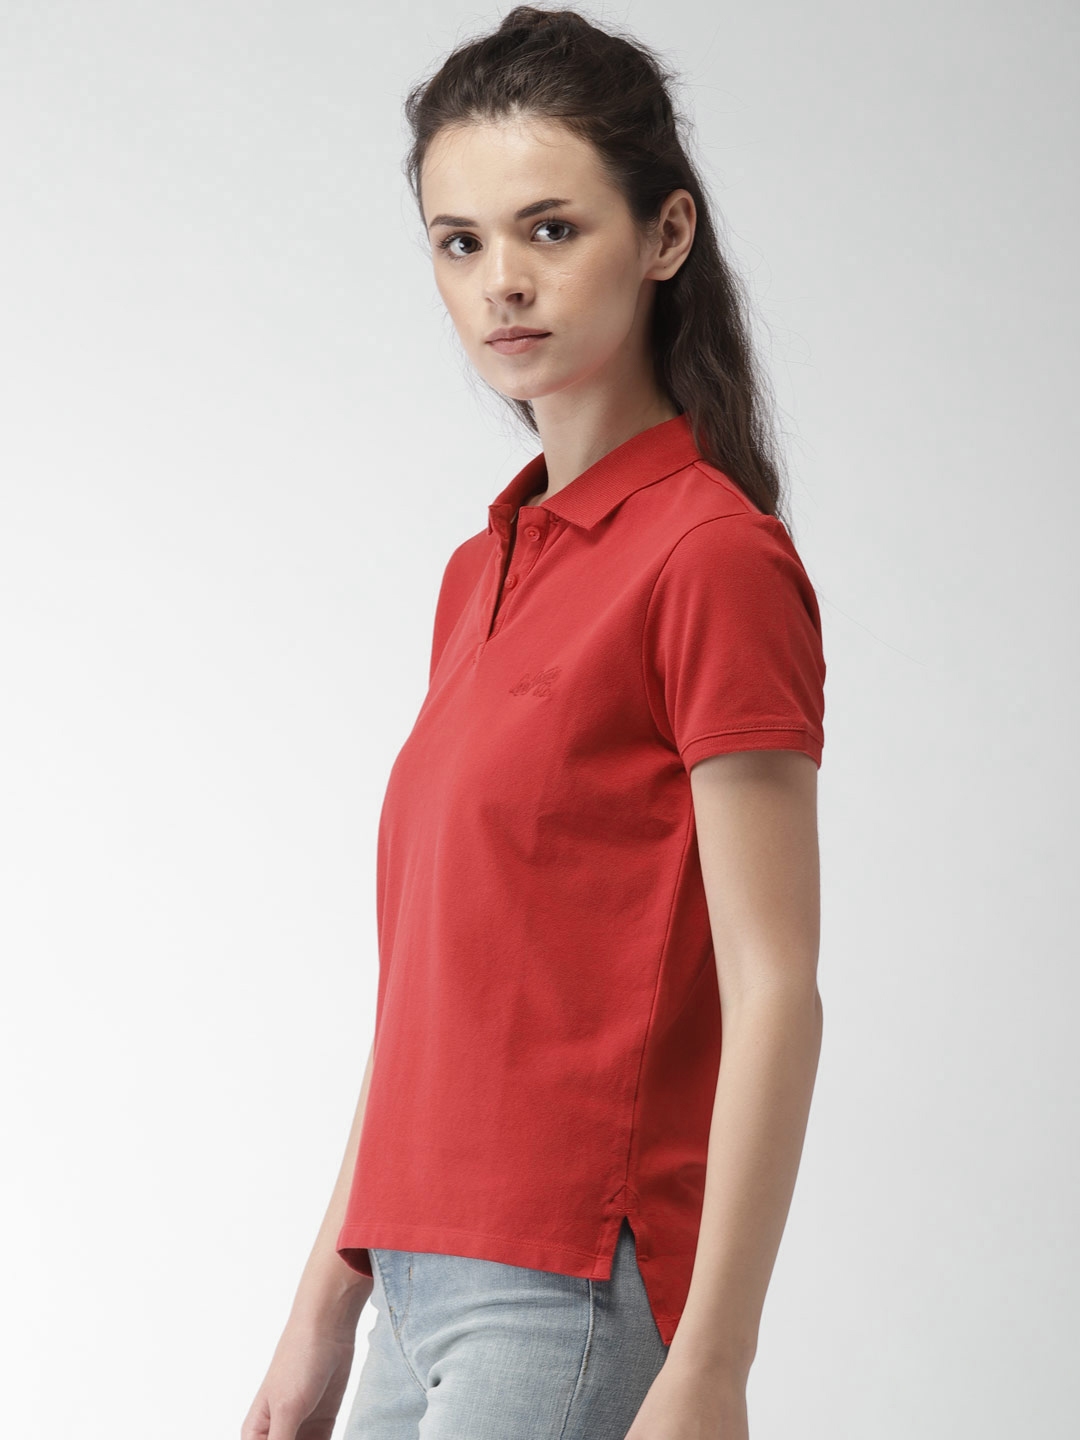 Buy Levis Women Red Solid Polo T Shirt - Tshirts for Women 2512897 | Myntra